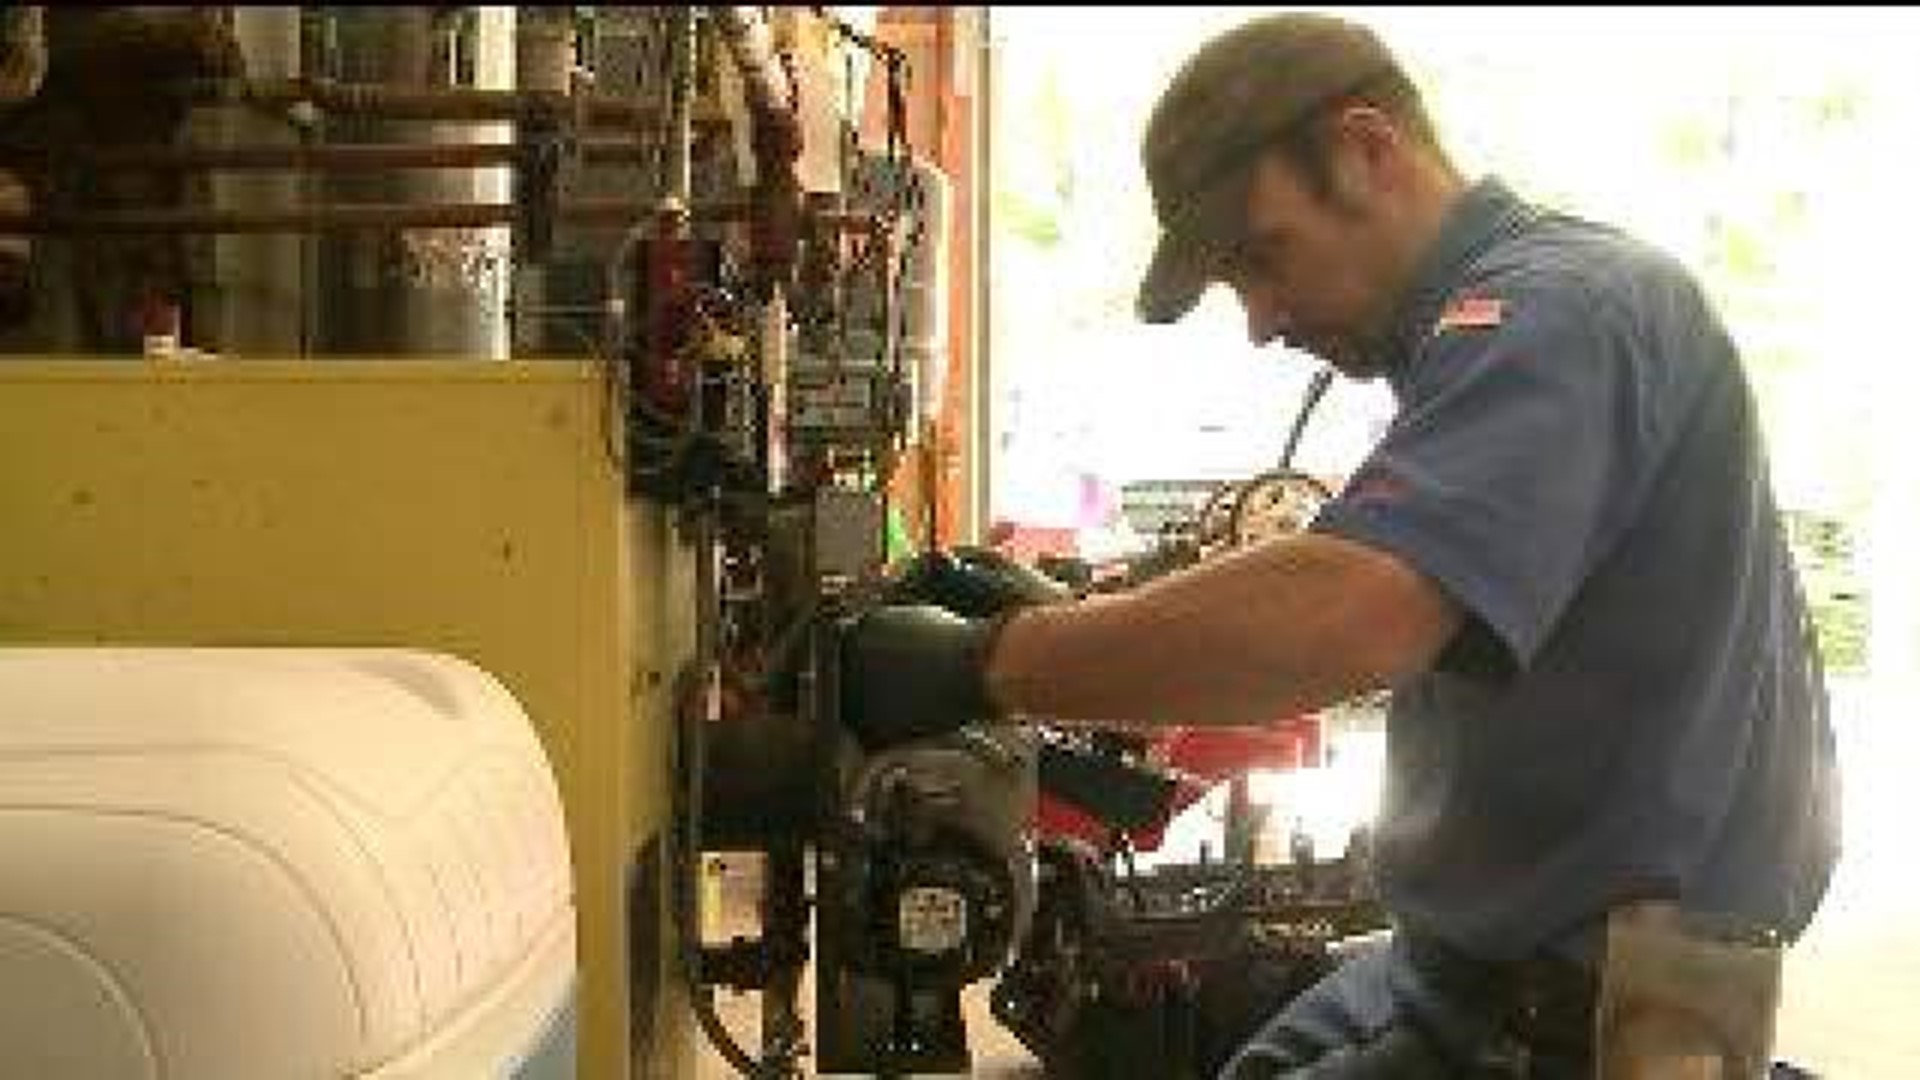 Furnace Repairs are heating up